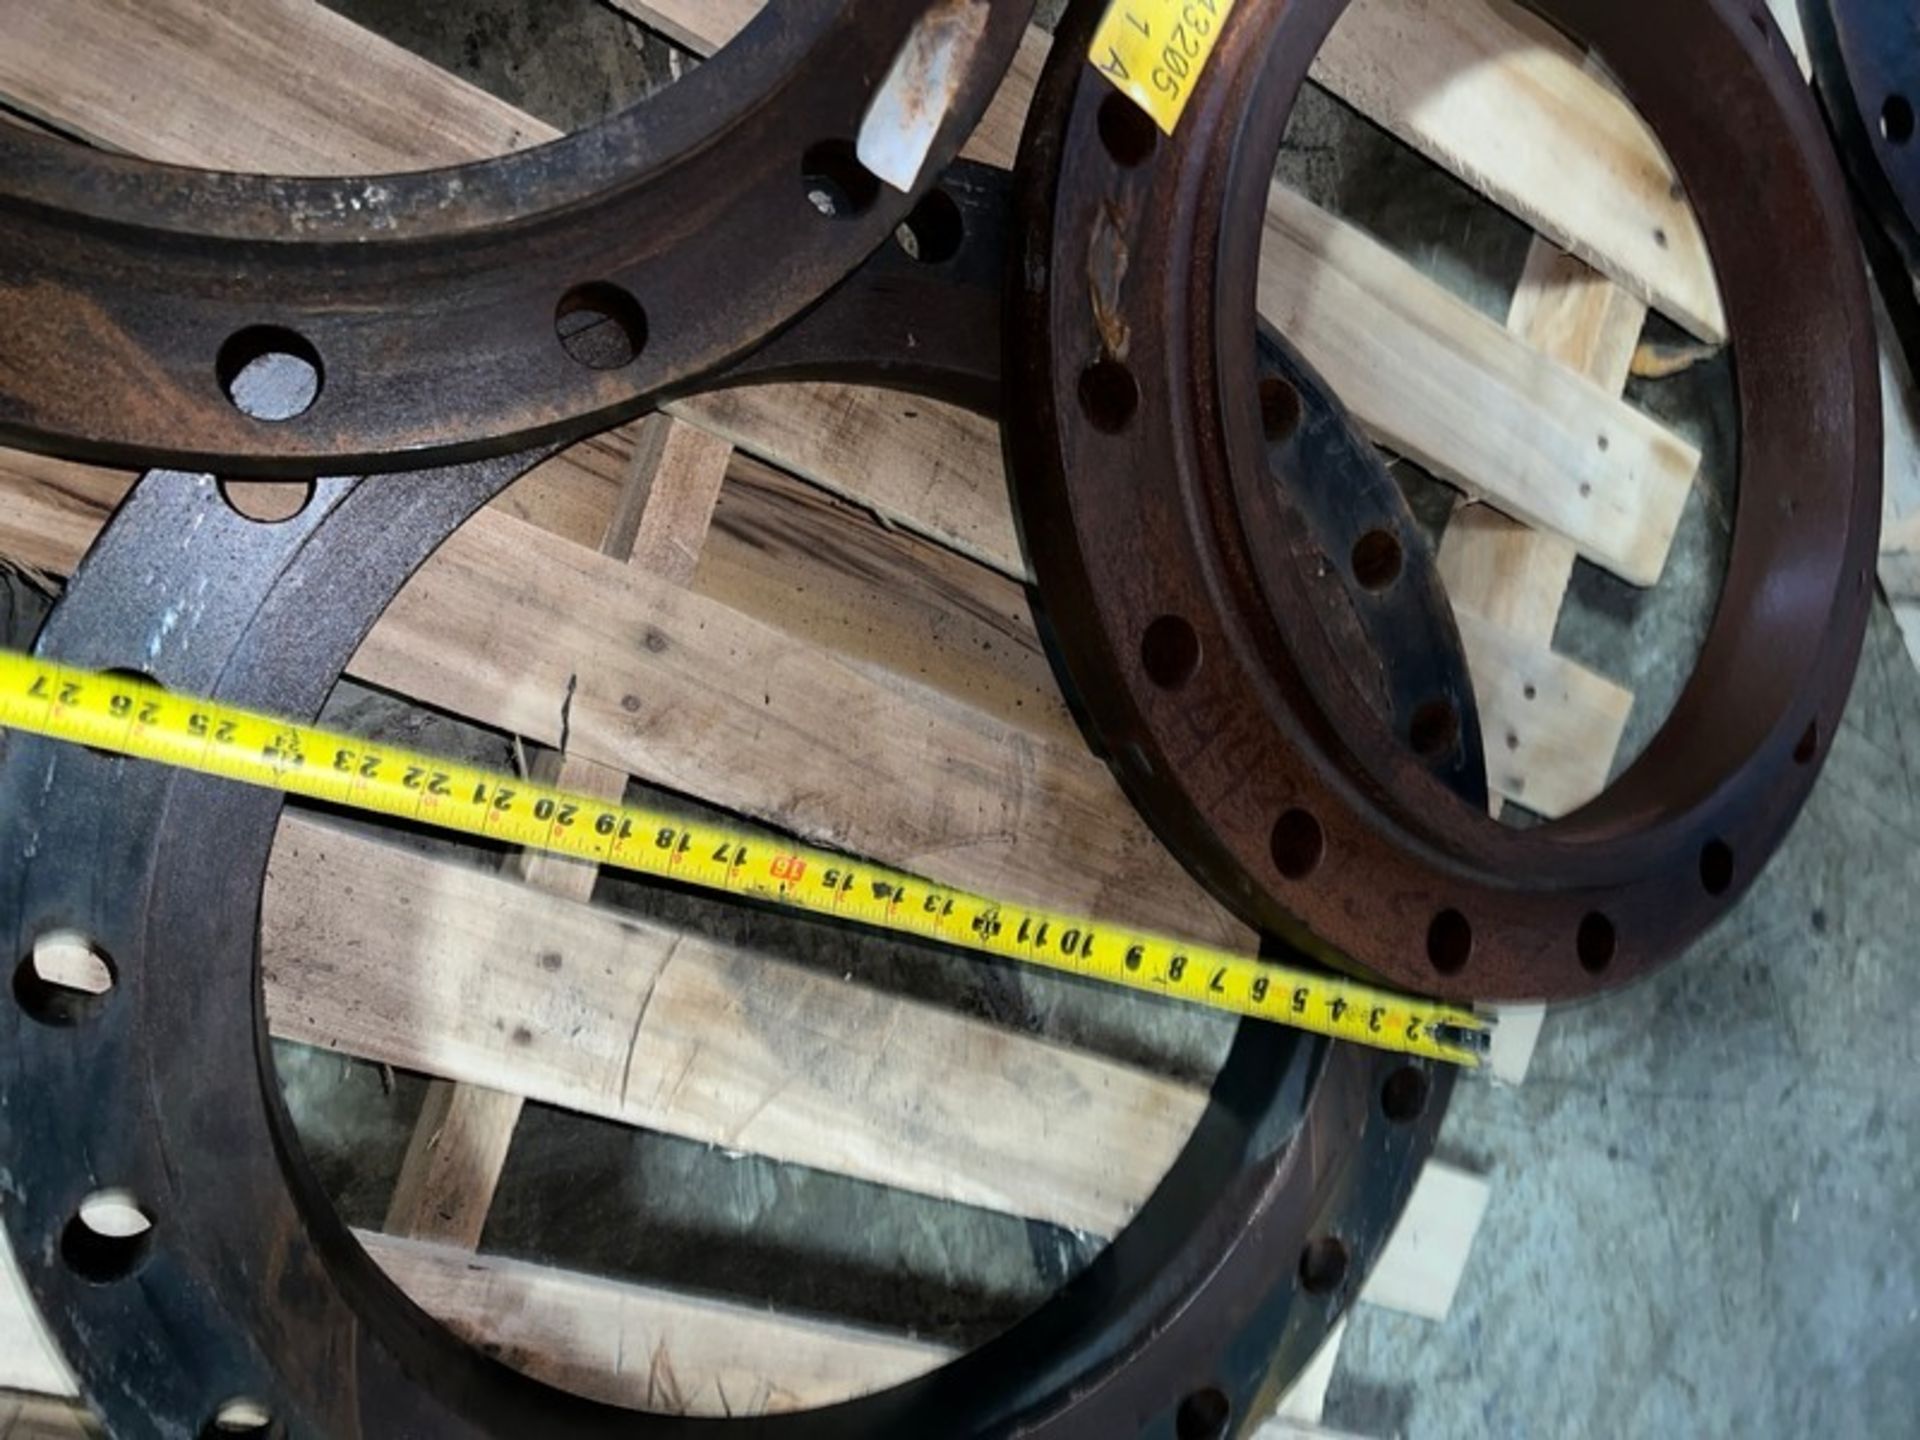 One Lot 3 Iron Pipe Flanges 25" OD, 18" ID, 12 Bolt Holes (RIGGING INCLDED WITH SALE PRICE) -- - Image 2 of 8